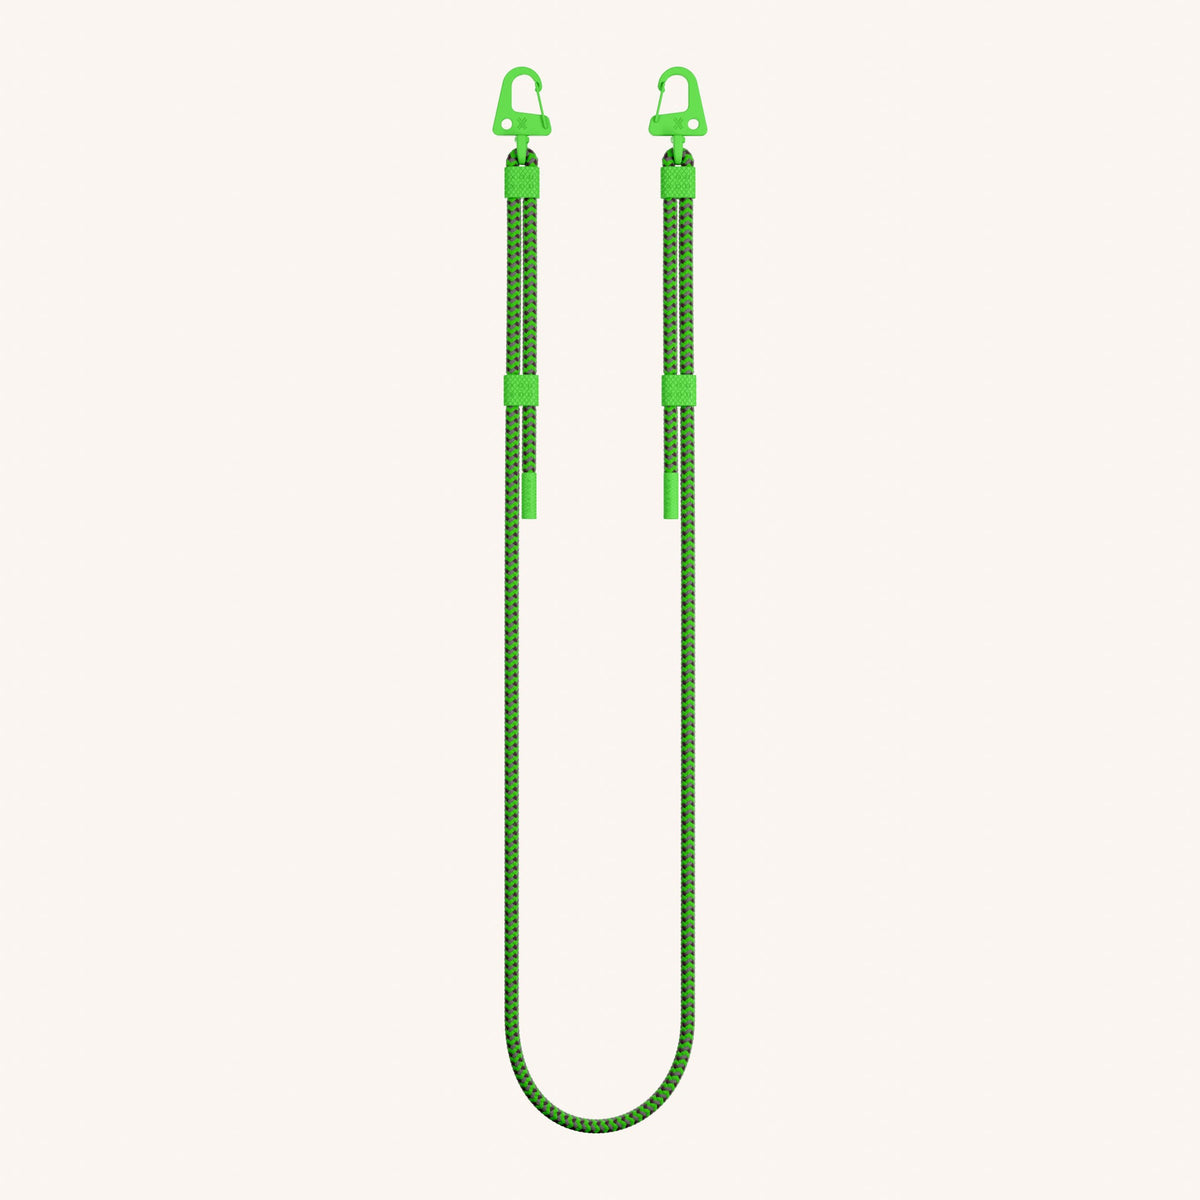 Phone Strap Carabiner Rope in Vibrant Neon Green Total View | XOUXOU